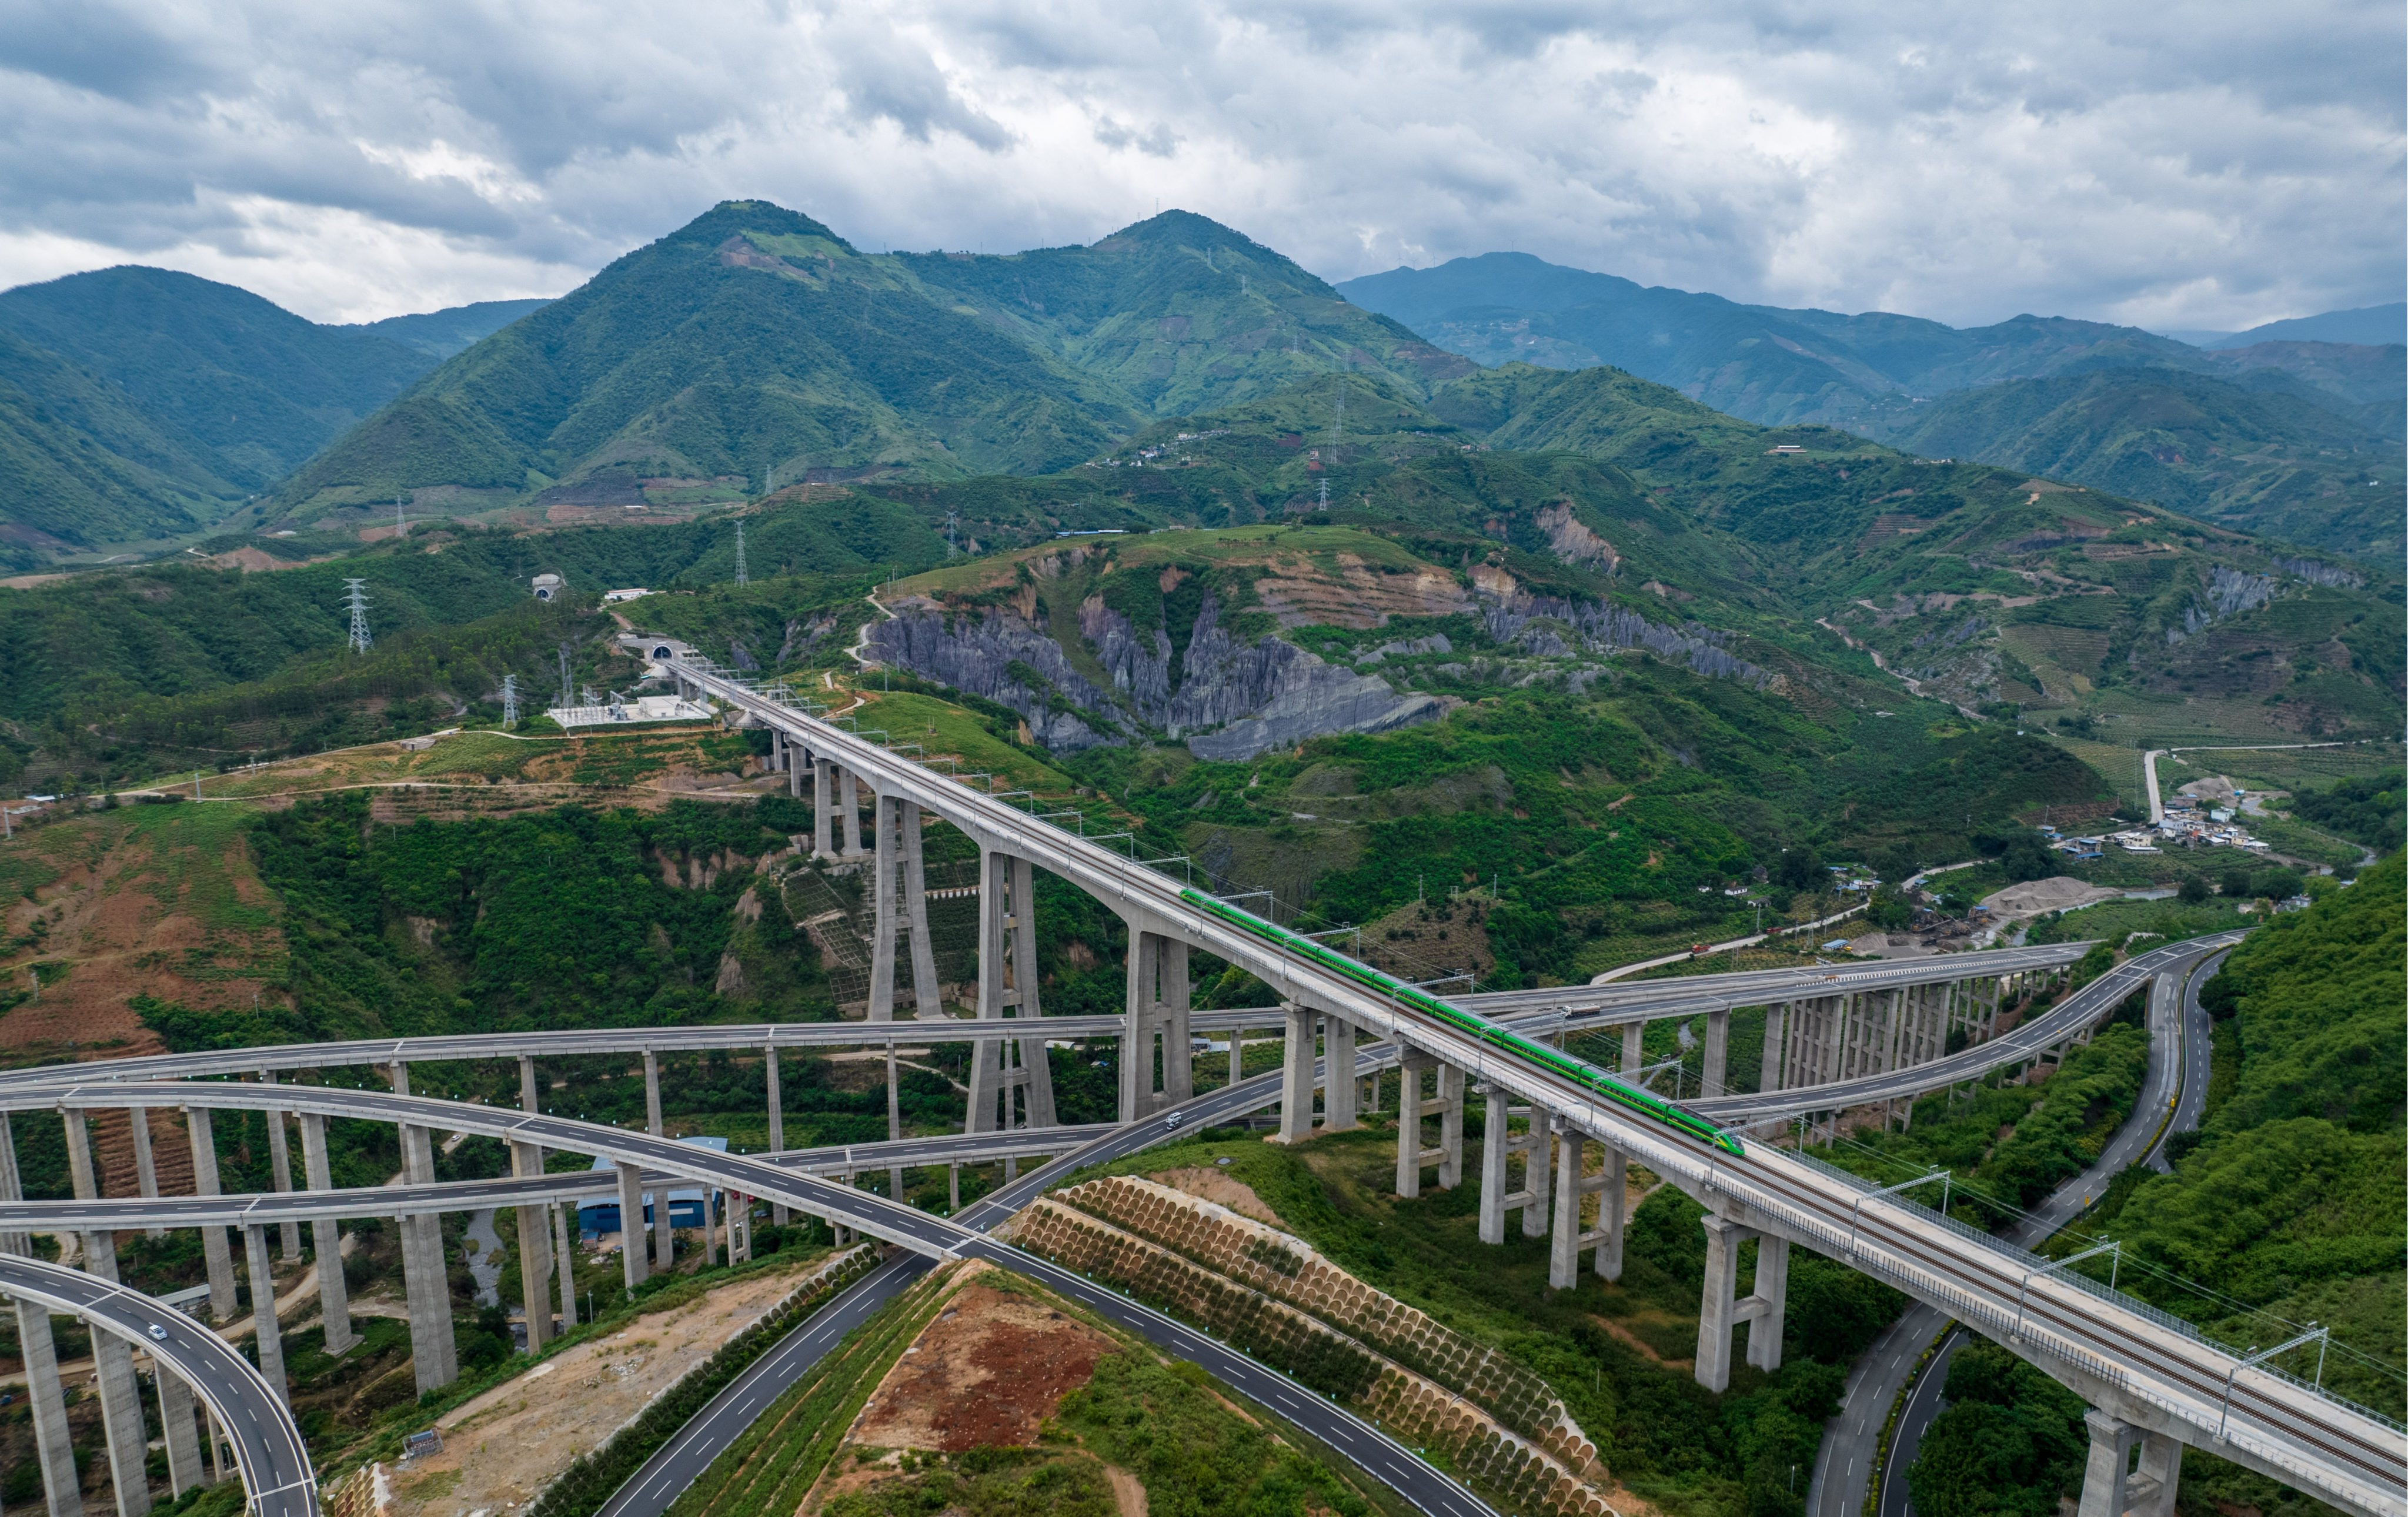 A Fuxing bullet train crosses the Nanxihe grand bridge on the China-Laos Railway in southwest China’s Yunnan province on June 2. China’s strength in high-speed rail construction would make it difficult for the US to compete in infrastructure funding in this area internationally. Photo: Xinhua